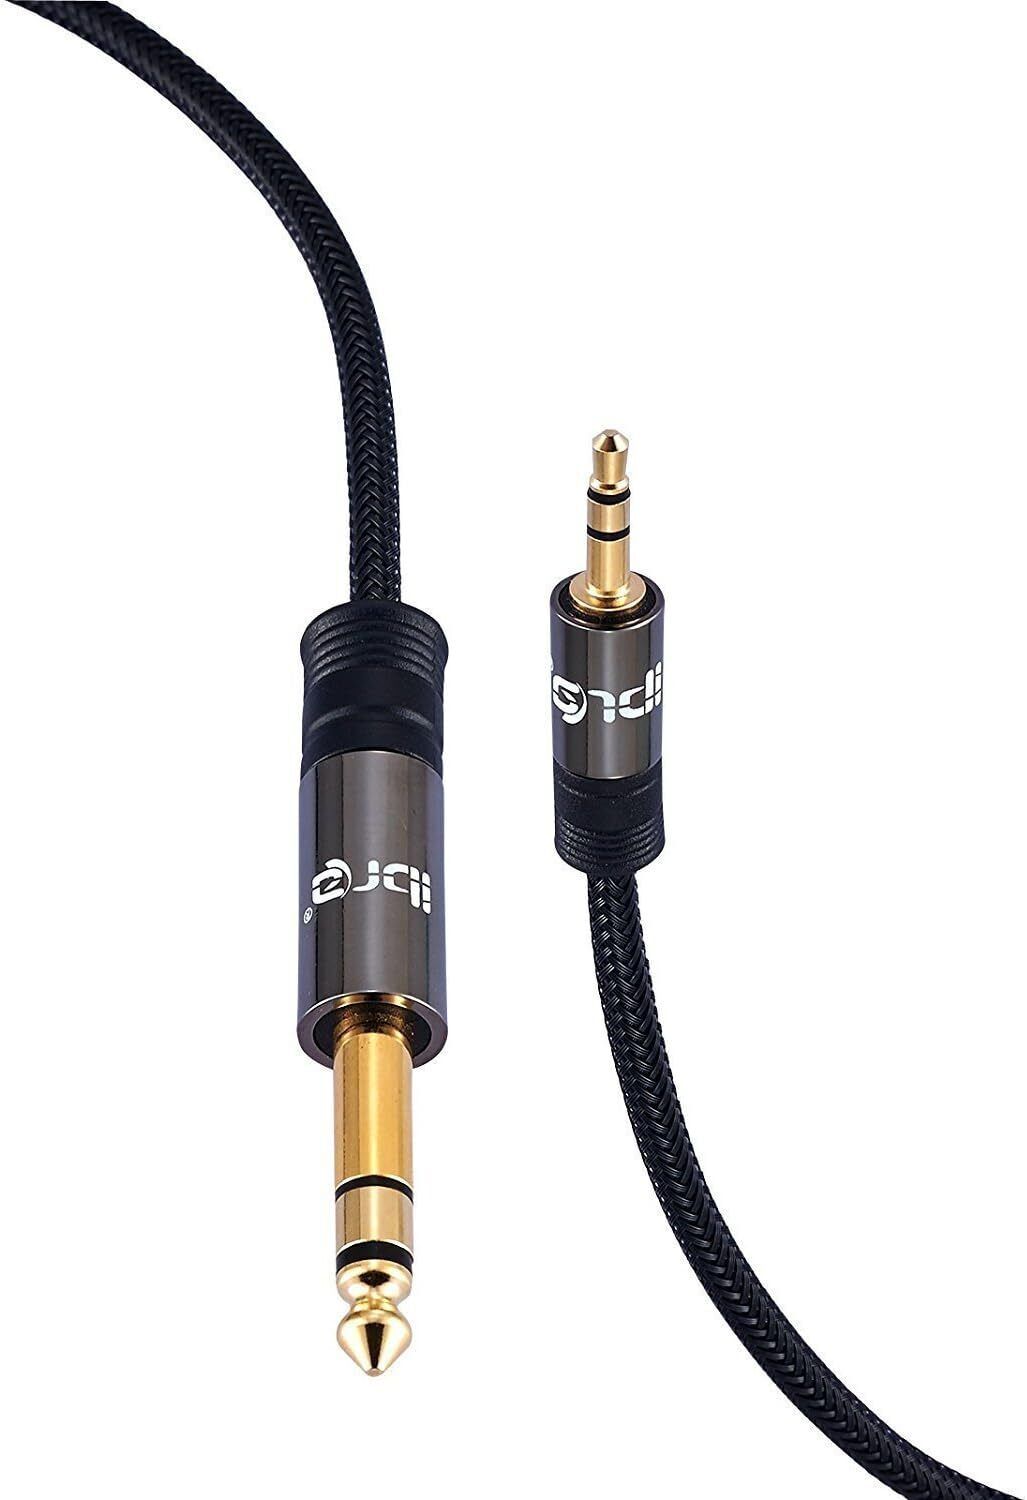 3.5mm to 6.35mm 1/4 inch Small to Big Mono Jack Audio Cable Plug Patch Lead Amp - 20M